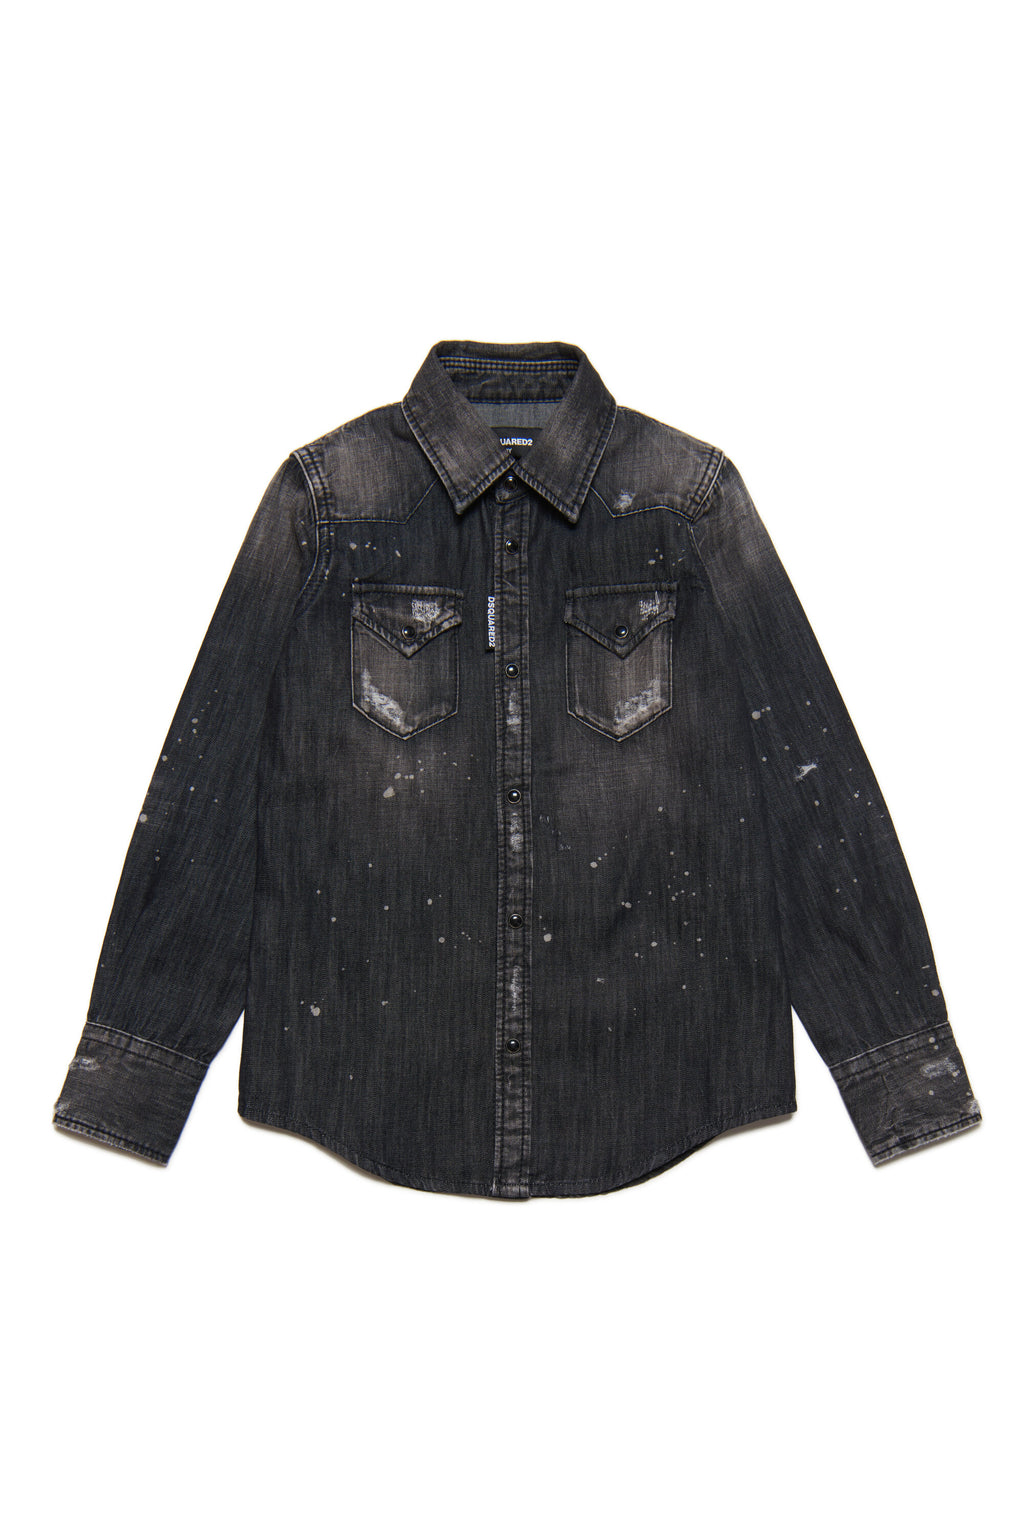 Black shaded denim shirt with tears and stains